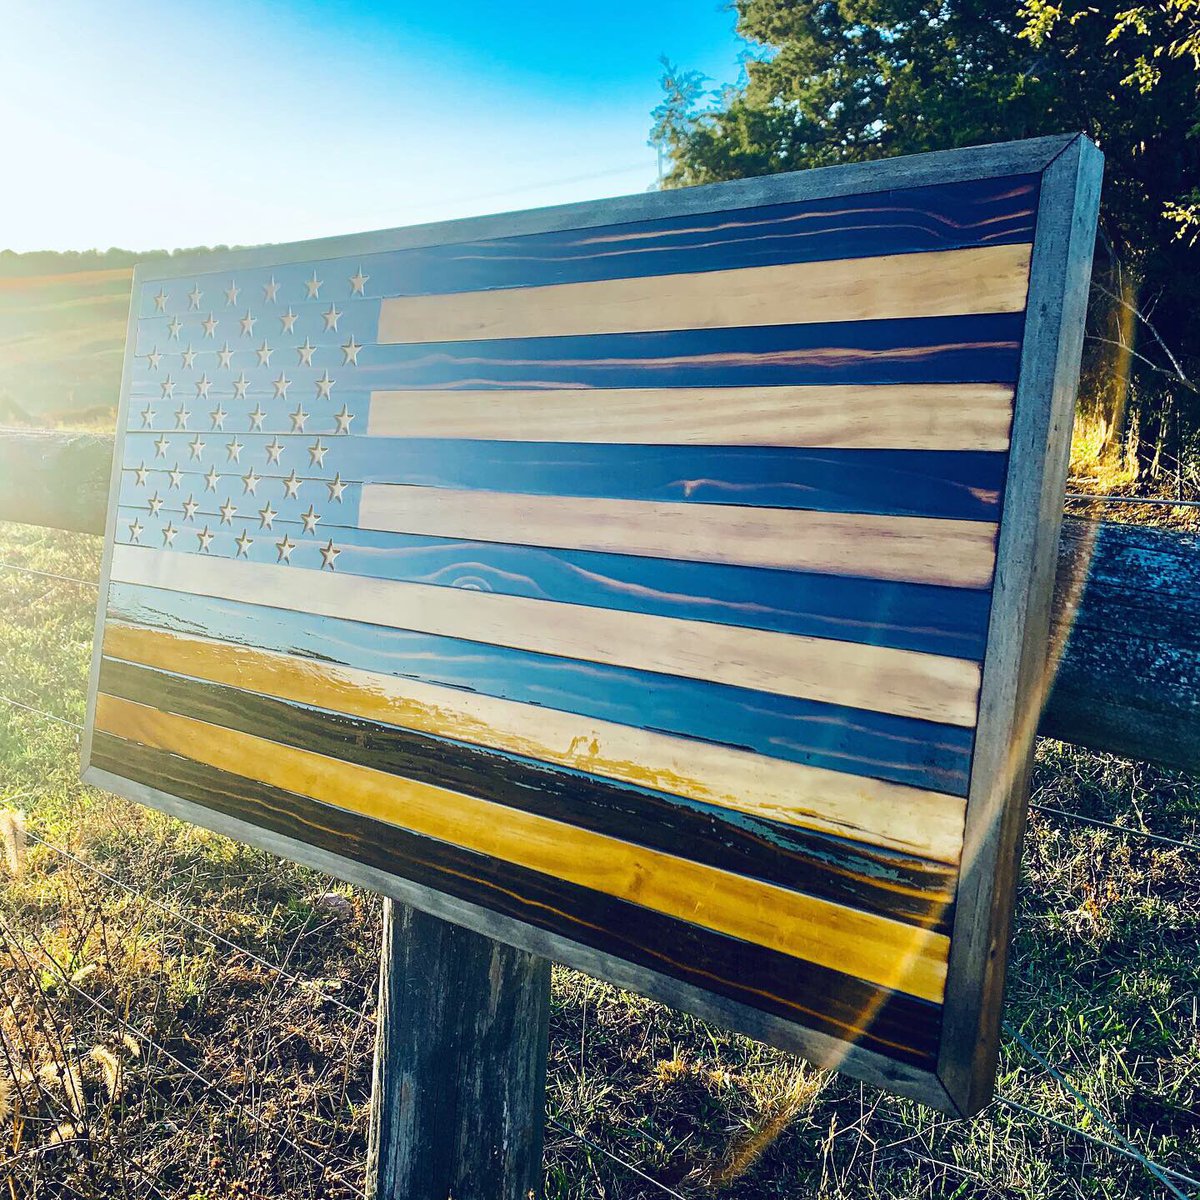 TARCO flags, built to hang anywhere. 

Where would you hang yours?

#america #americana #woodamericanflag #homedecor #outdoors #oleglory #patriotic #rusticdecor #rustichomedecor #rusticliving #woodworking #woodart #wallart #iloveamerica #jeeplife #WednesdayVibes